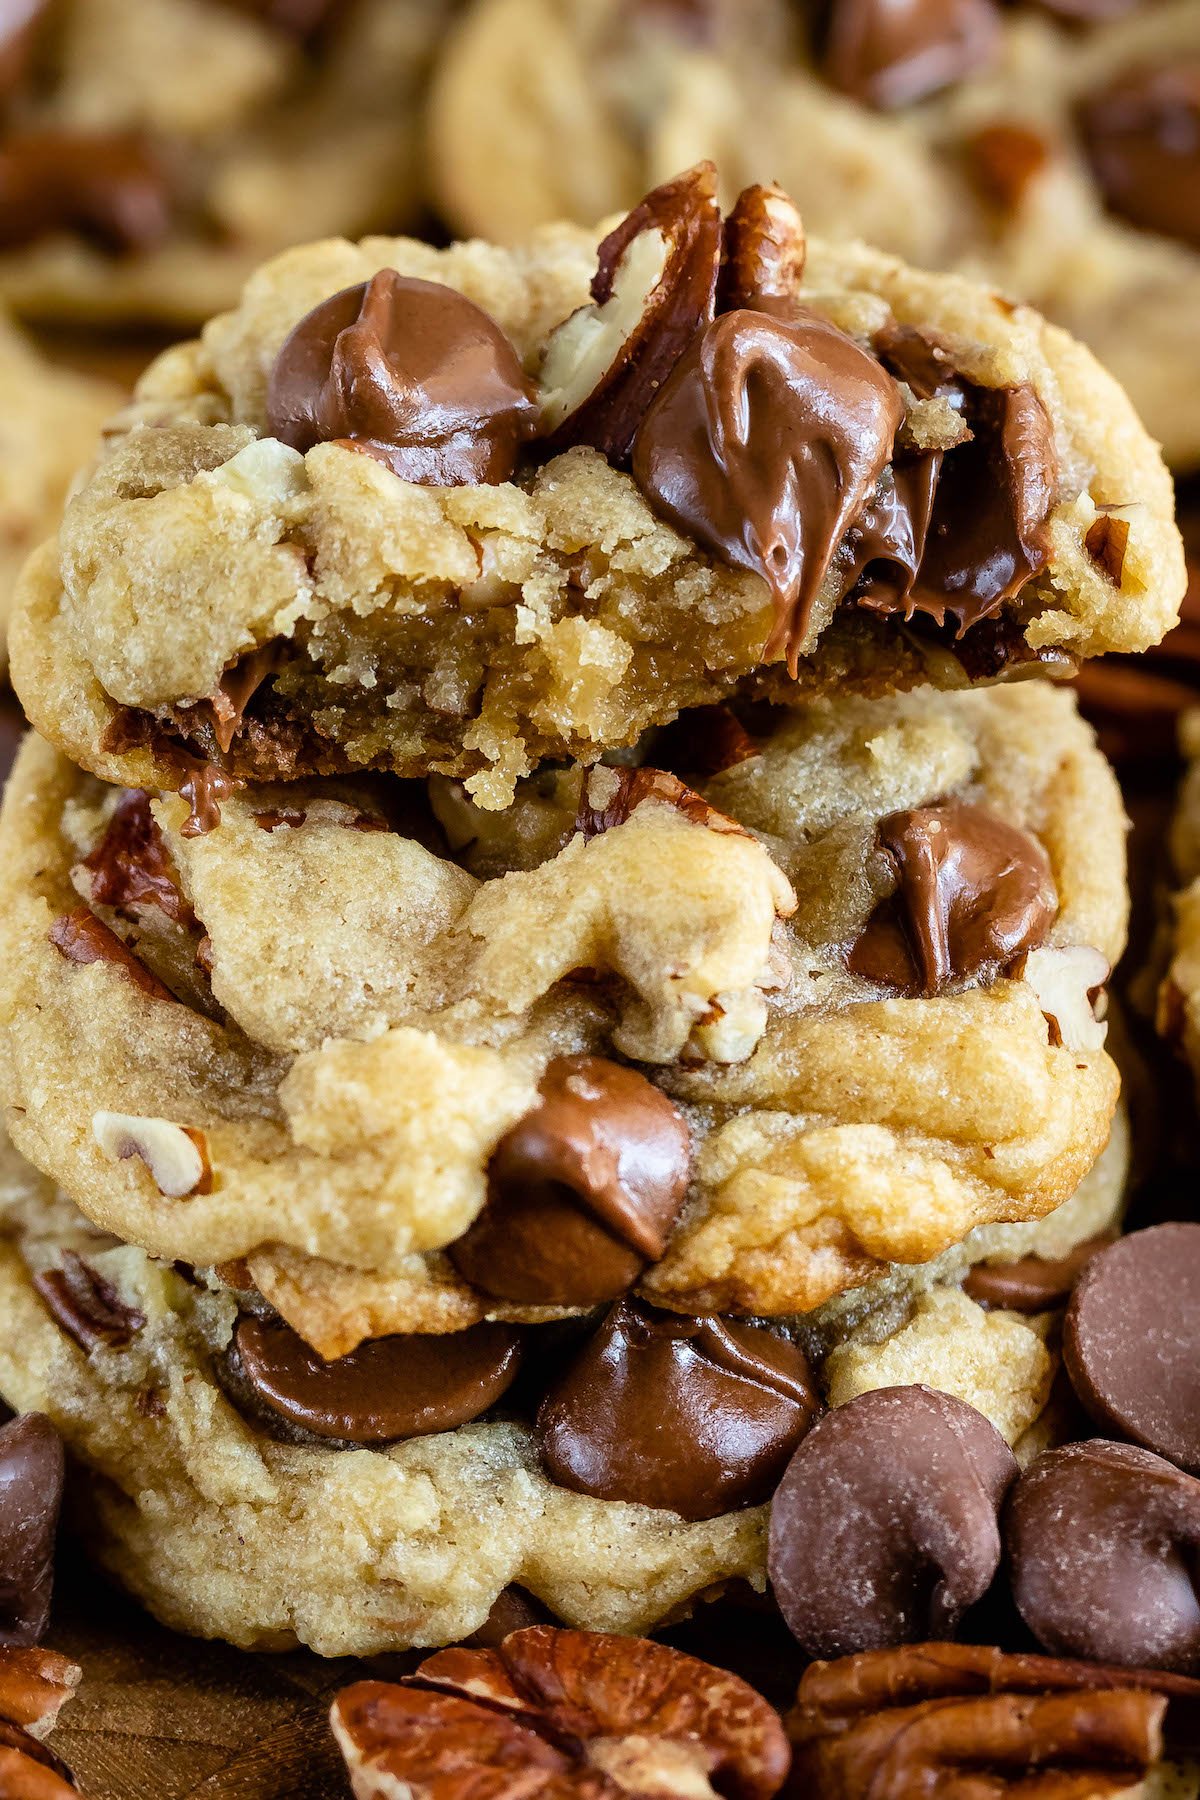 stacked chocolate chip cookies with pecans baked in.